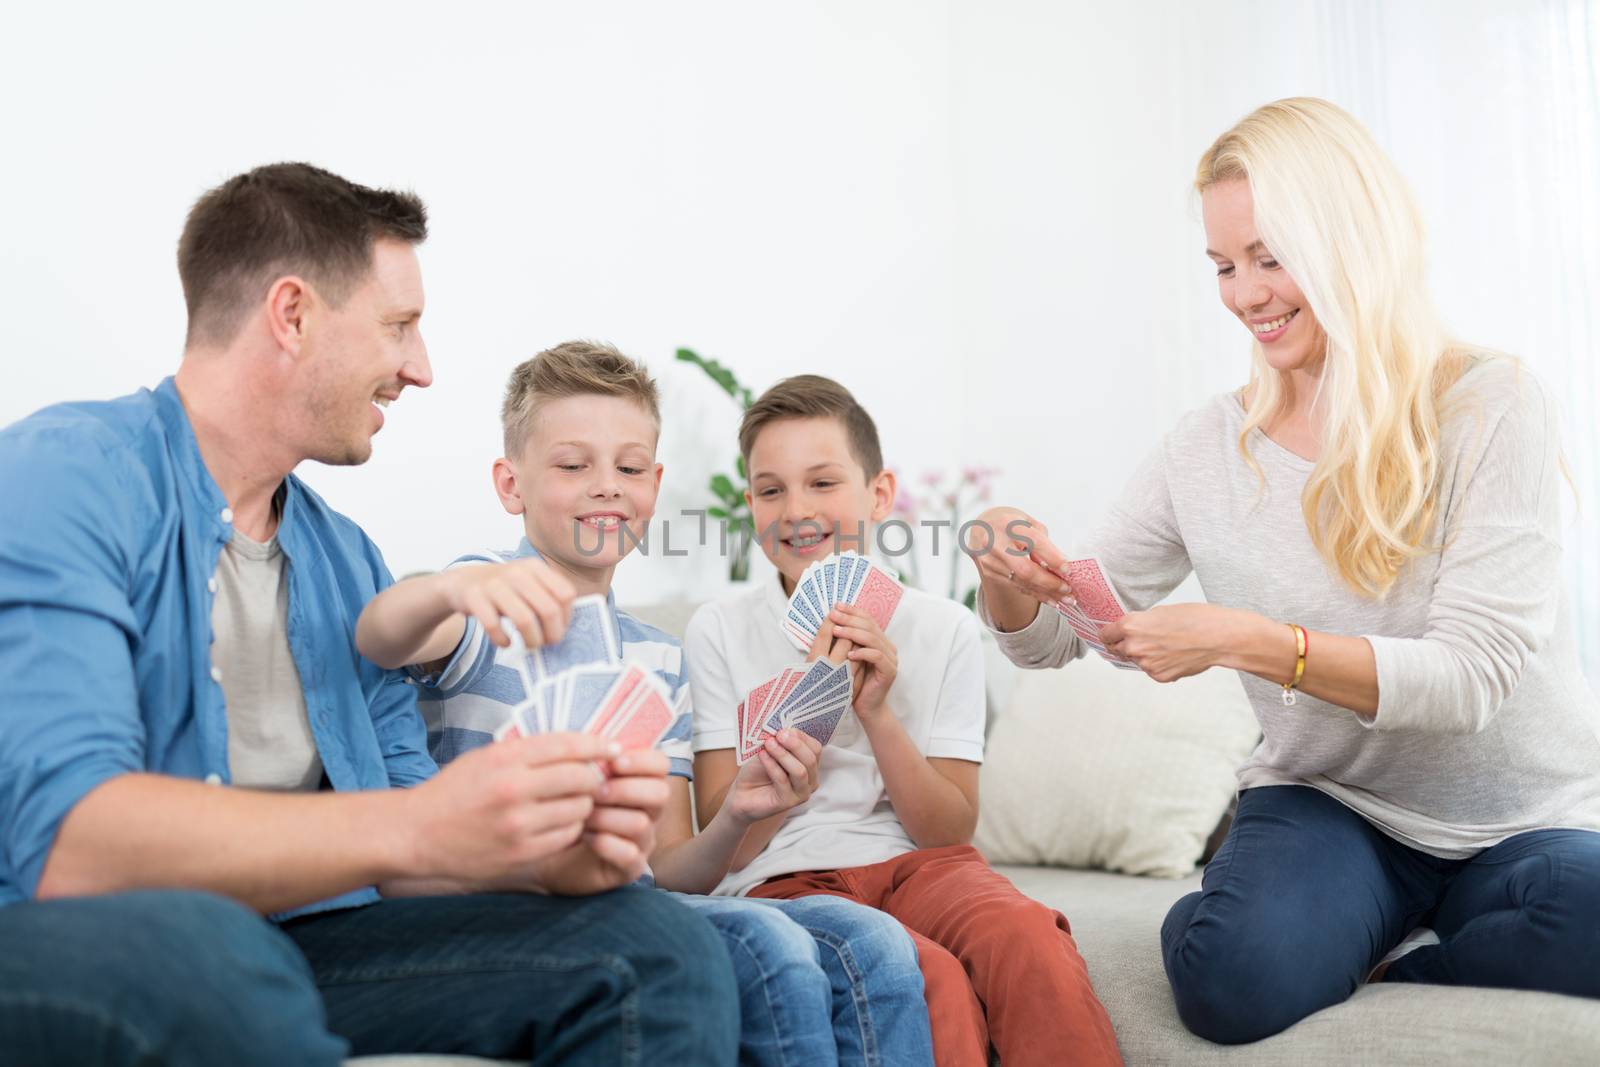 Happy young family playing card game on living room sofa at home. Spending quality leisure time with children and family concept. Playing cards are generic and debranded.